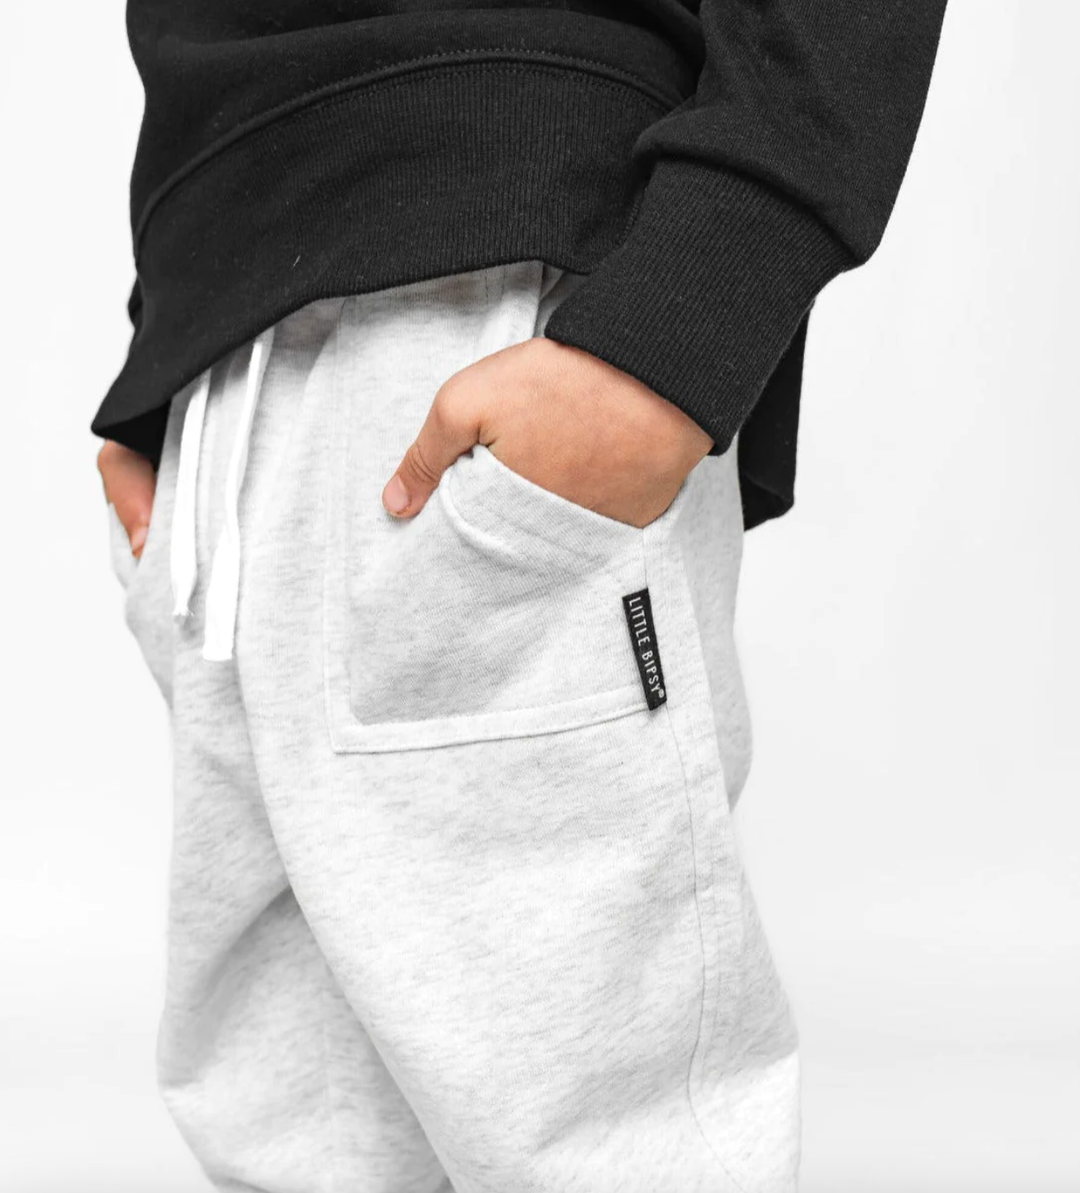 Little Bipsy - Everyday Jersey Joggers in Light Heather Grey (4-5)